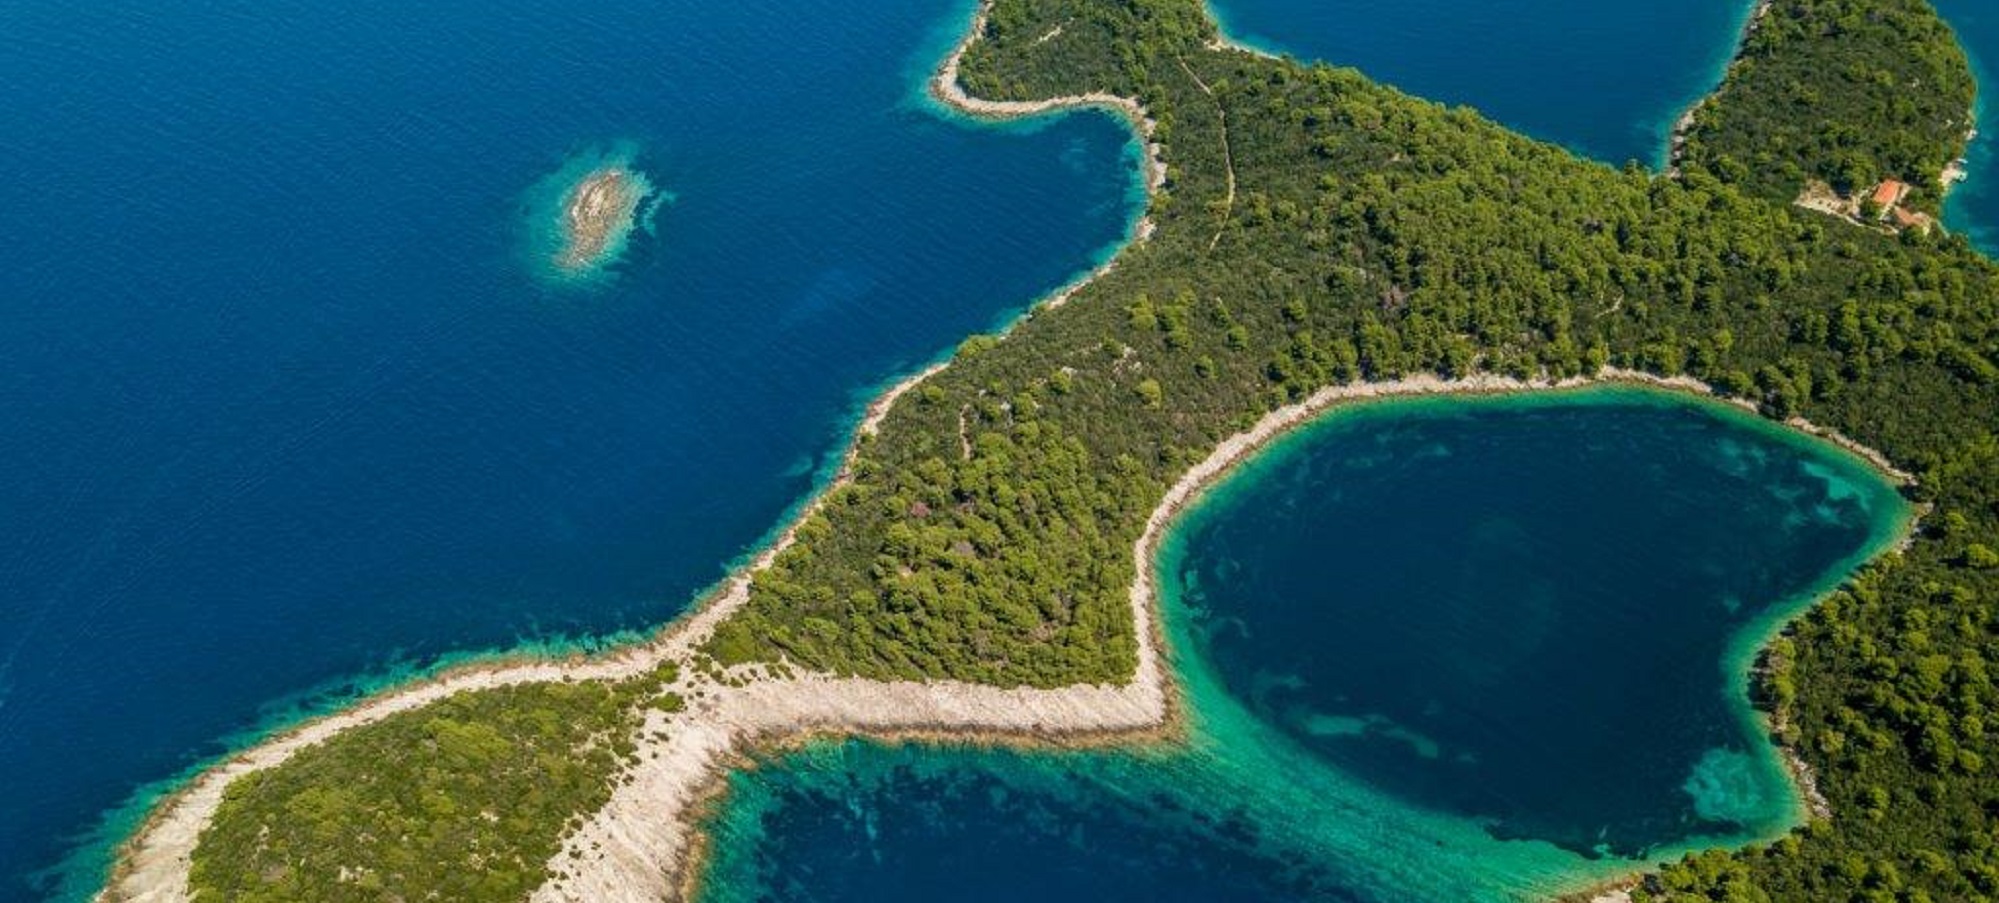 Discover the Best Family-Friendly Destinations in Croatia